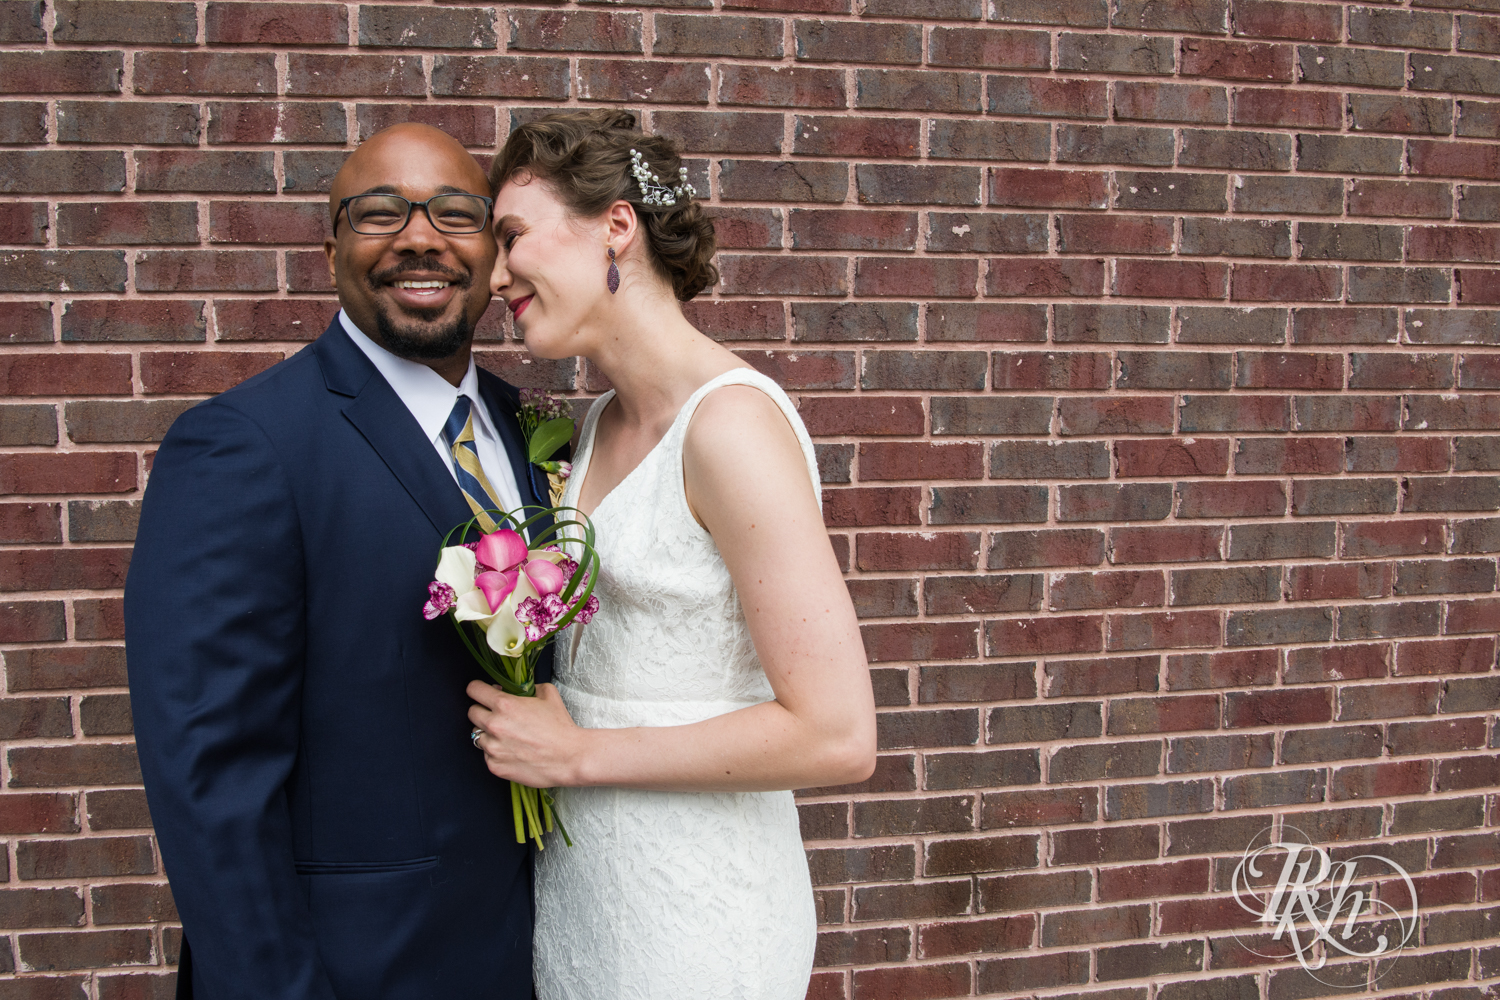 Biracial bride and groom laughing